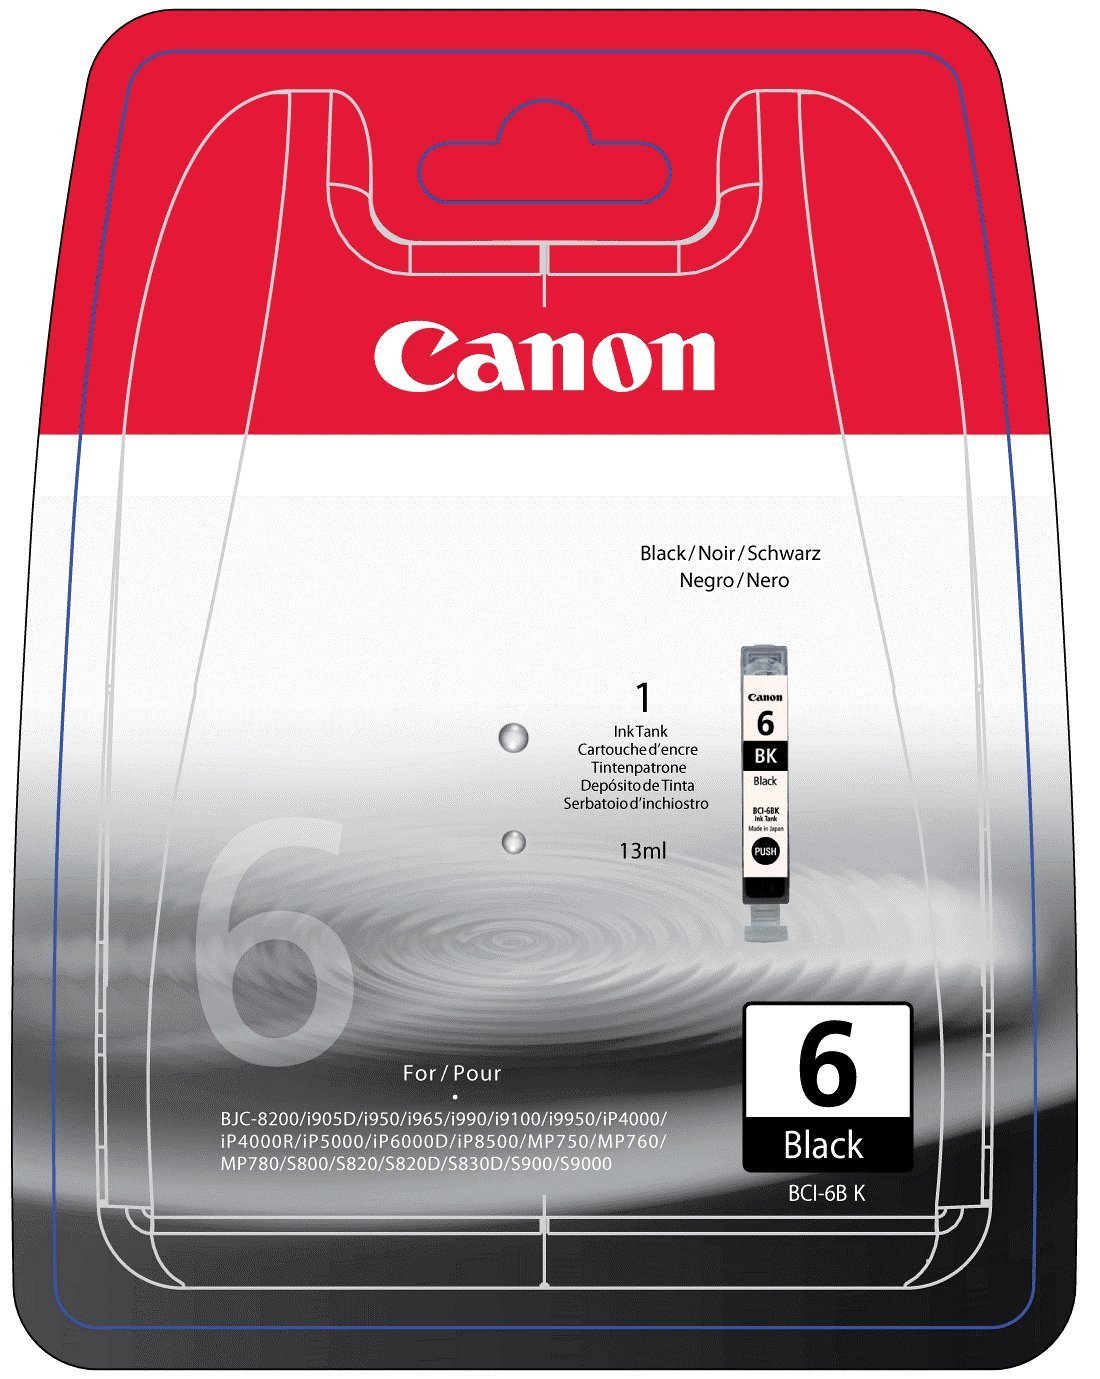 Related to CANON PIXMA MP750 INK JET: BCI-6BK